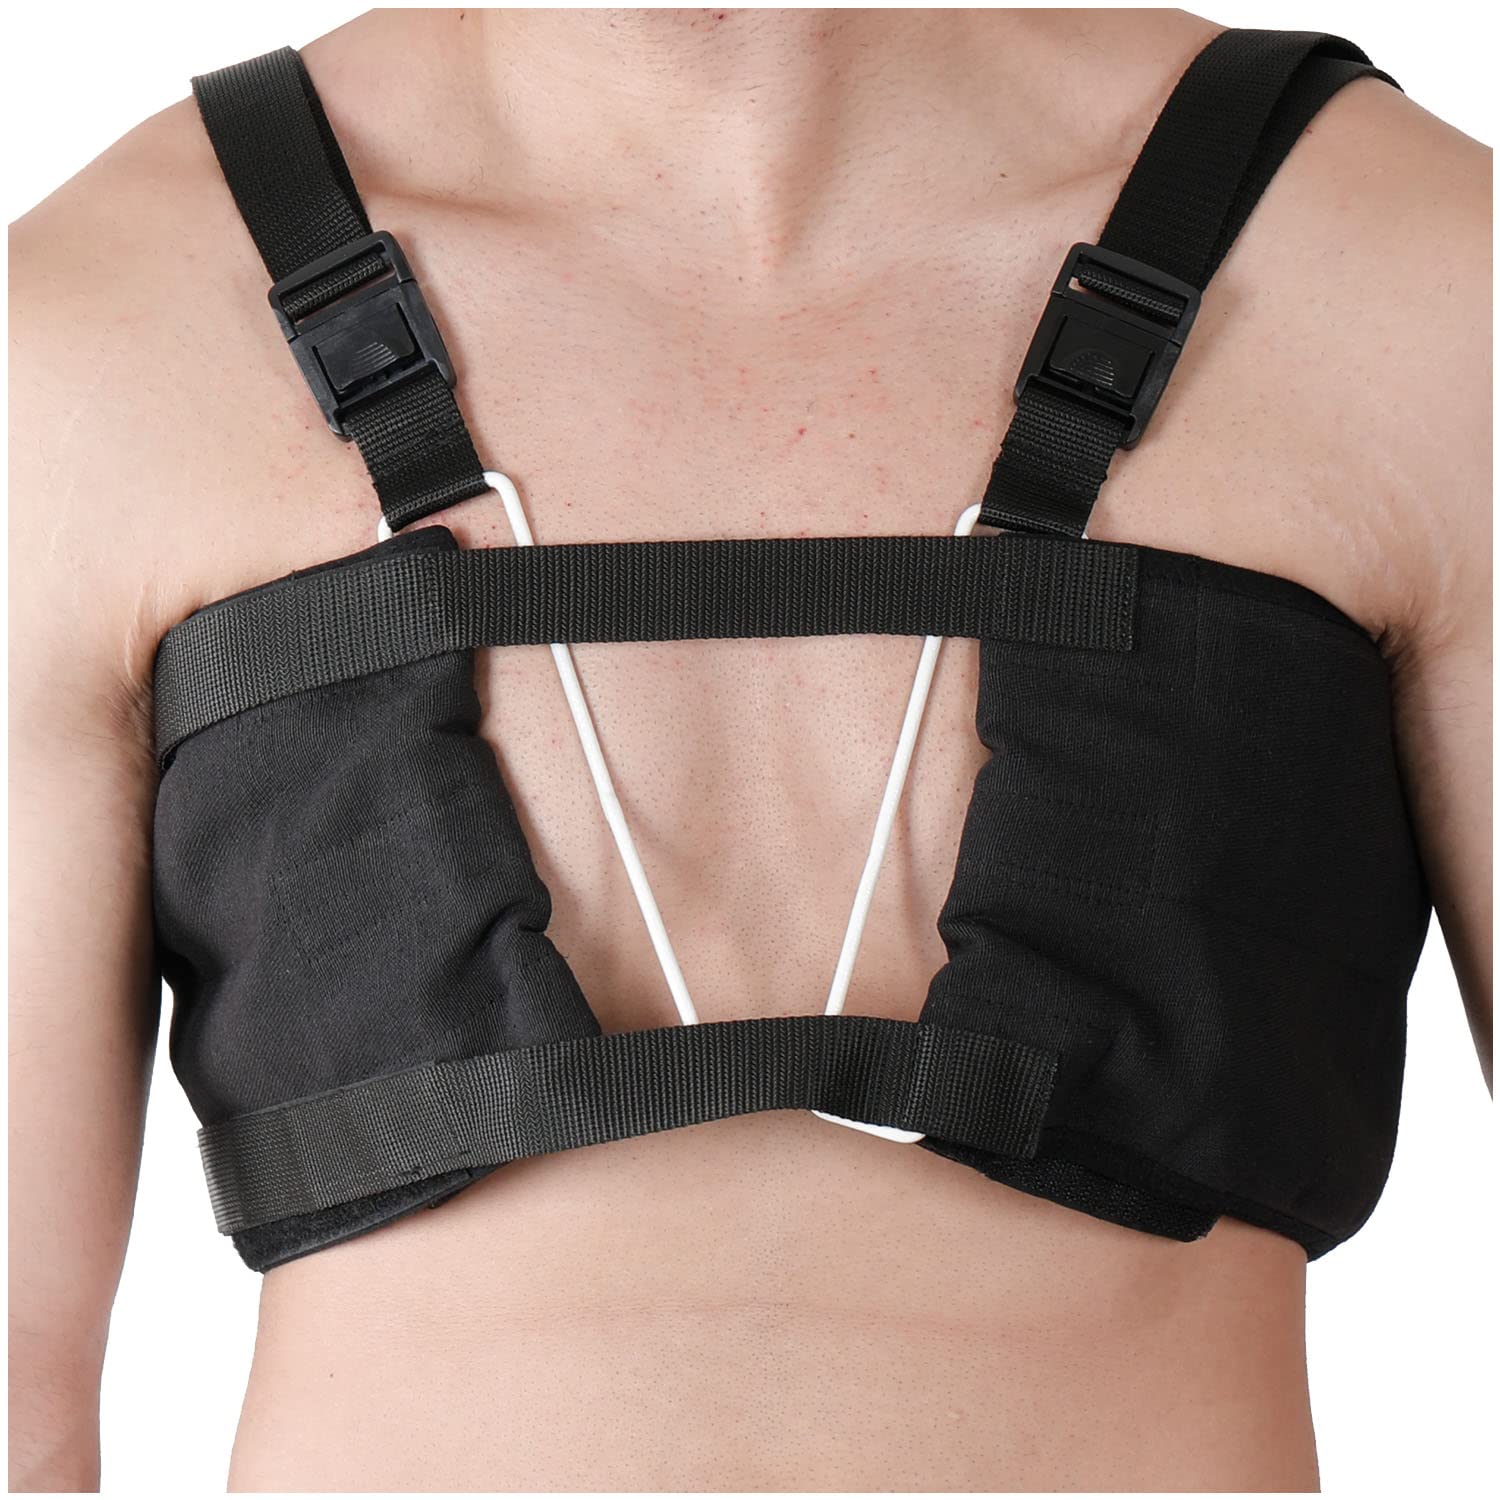 Armor Adult Unisex Chest Support Brace with 2 Wire Frame Grips to Stabilize  the Thorax after Open Heart Surgery Thoracic Procedure or Fractures of the  Sternum or Rib Cage Black Color Size